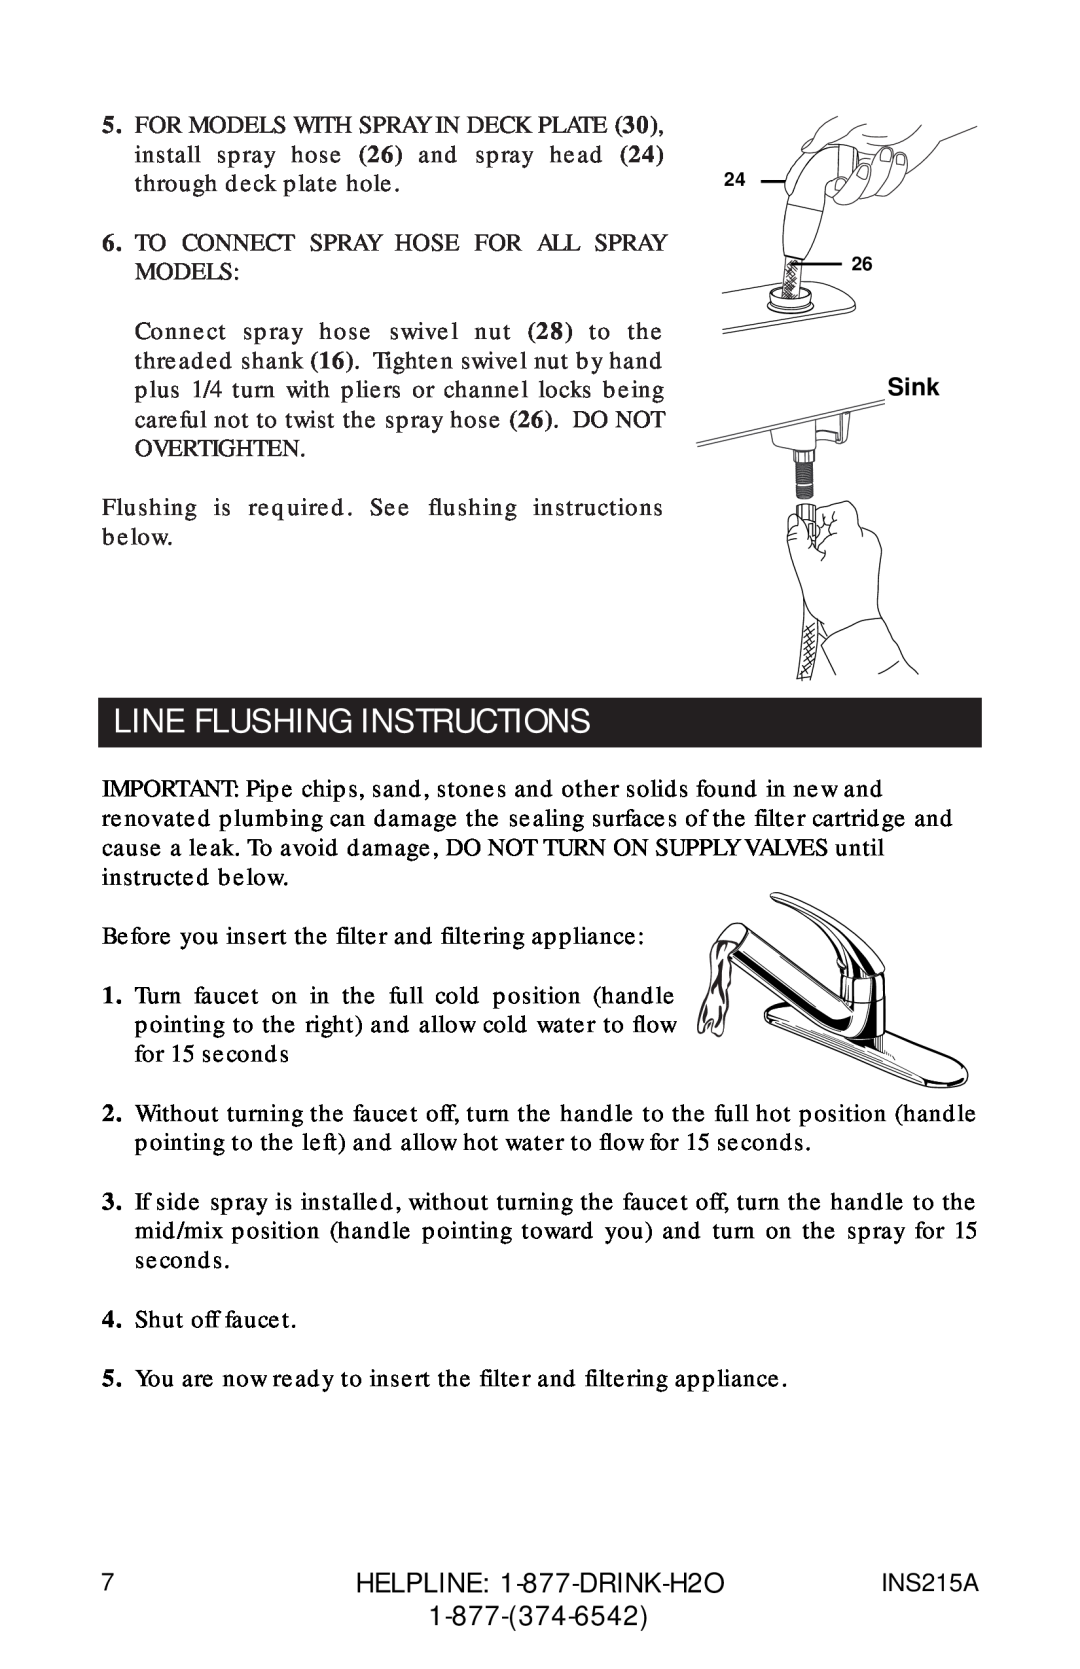 Moen 7037 87025, 87030, 87034 Series owner manual Line Flushing Instructions, Sink, INS215A 